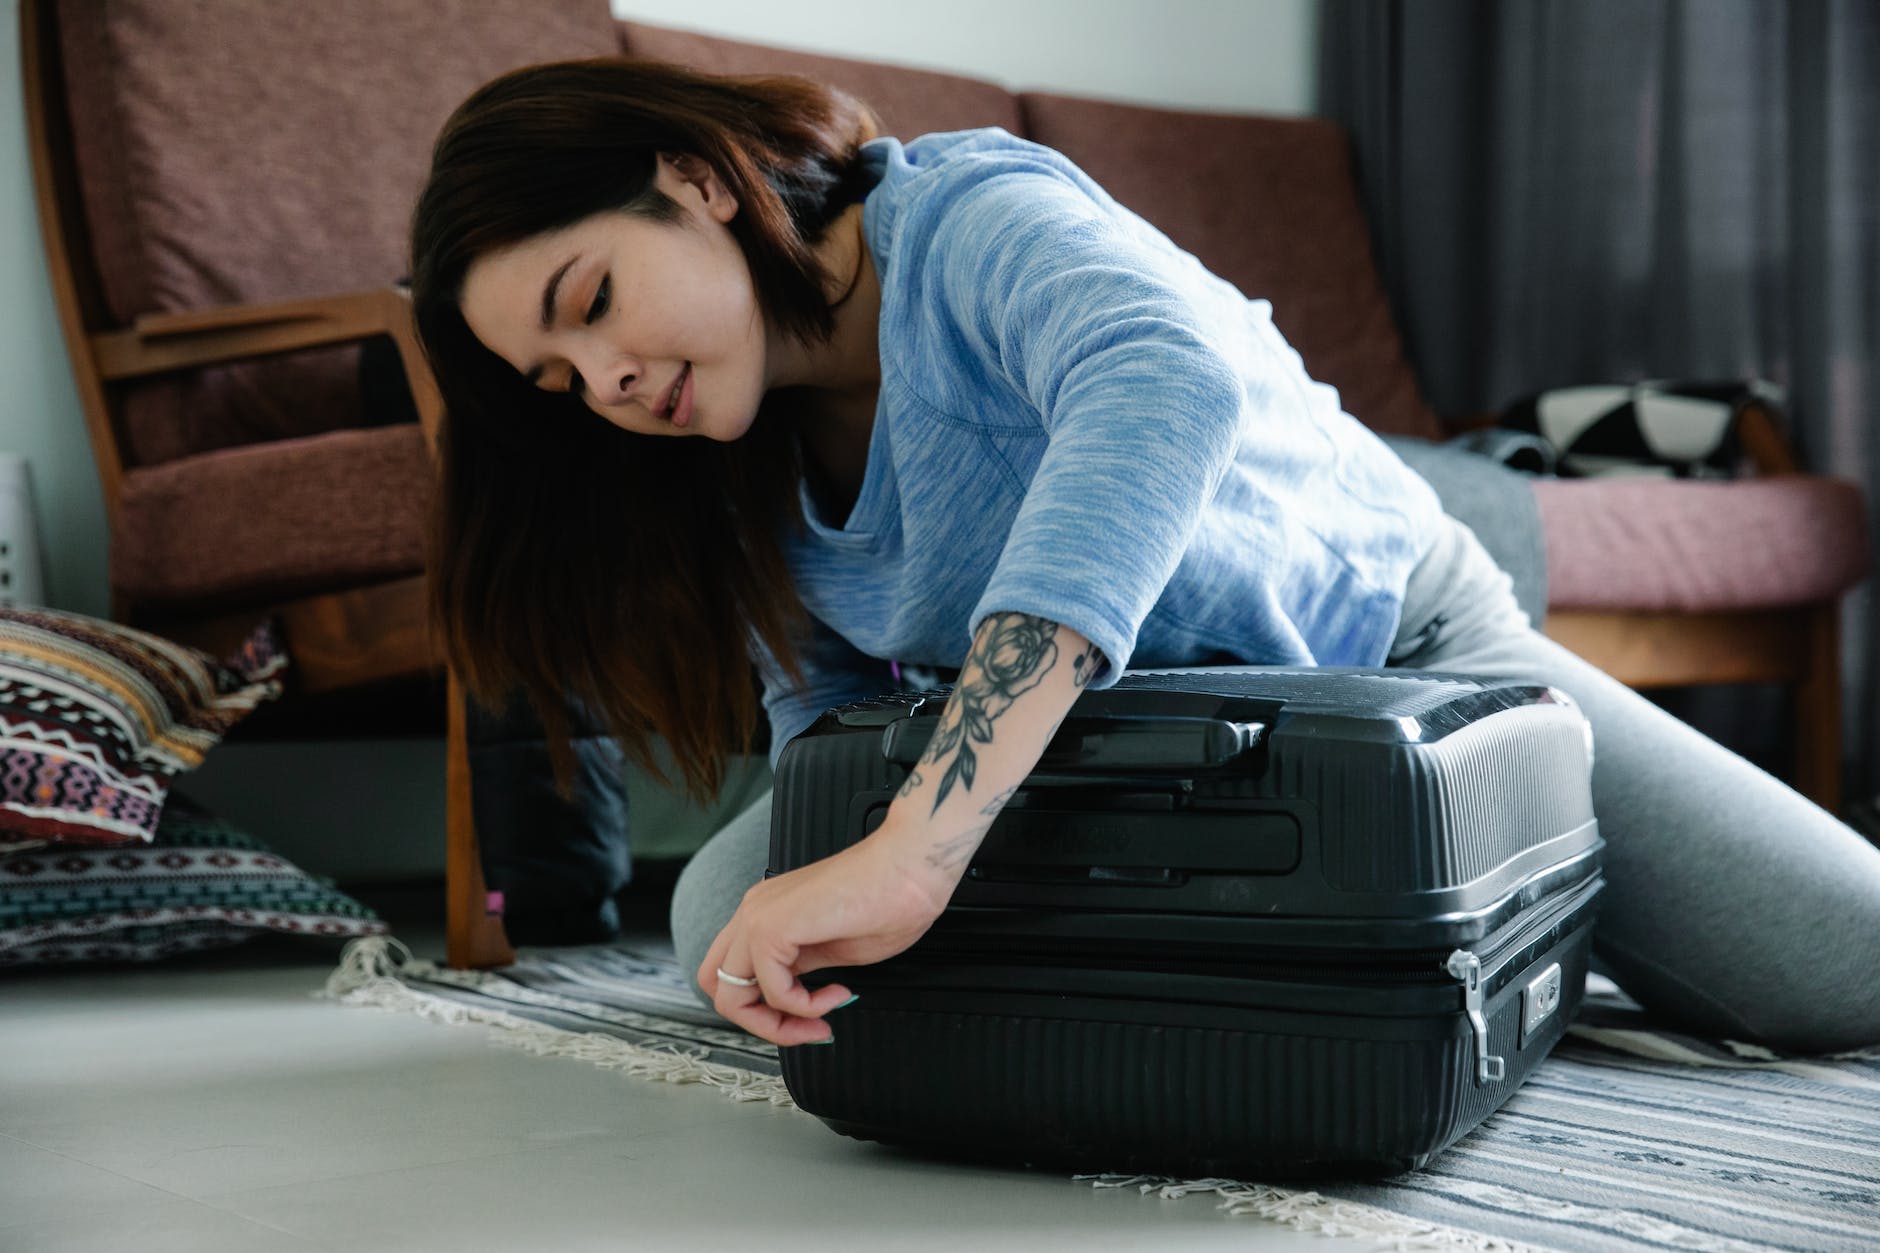 woman zipping a suitcase